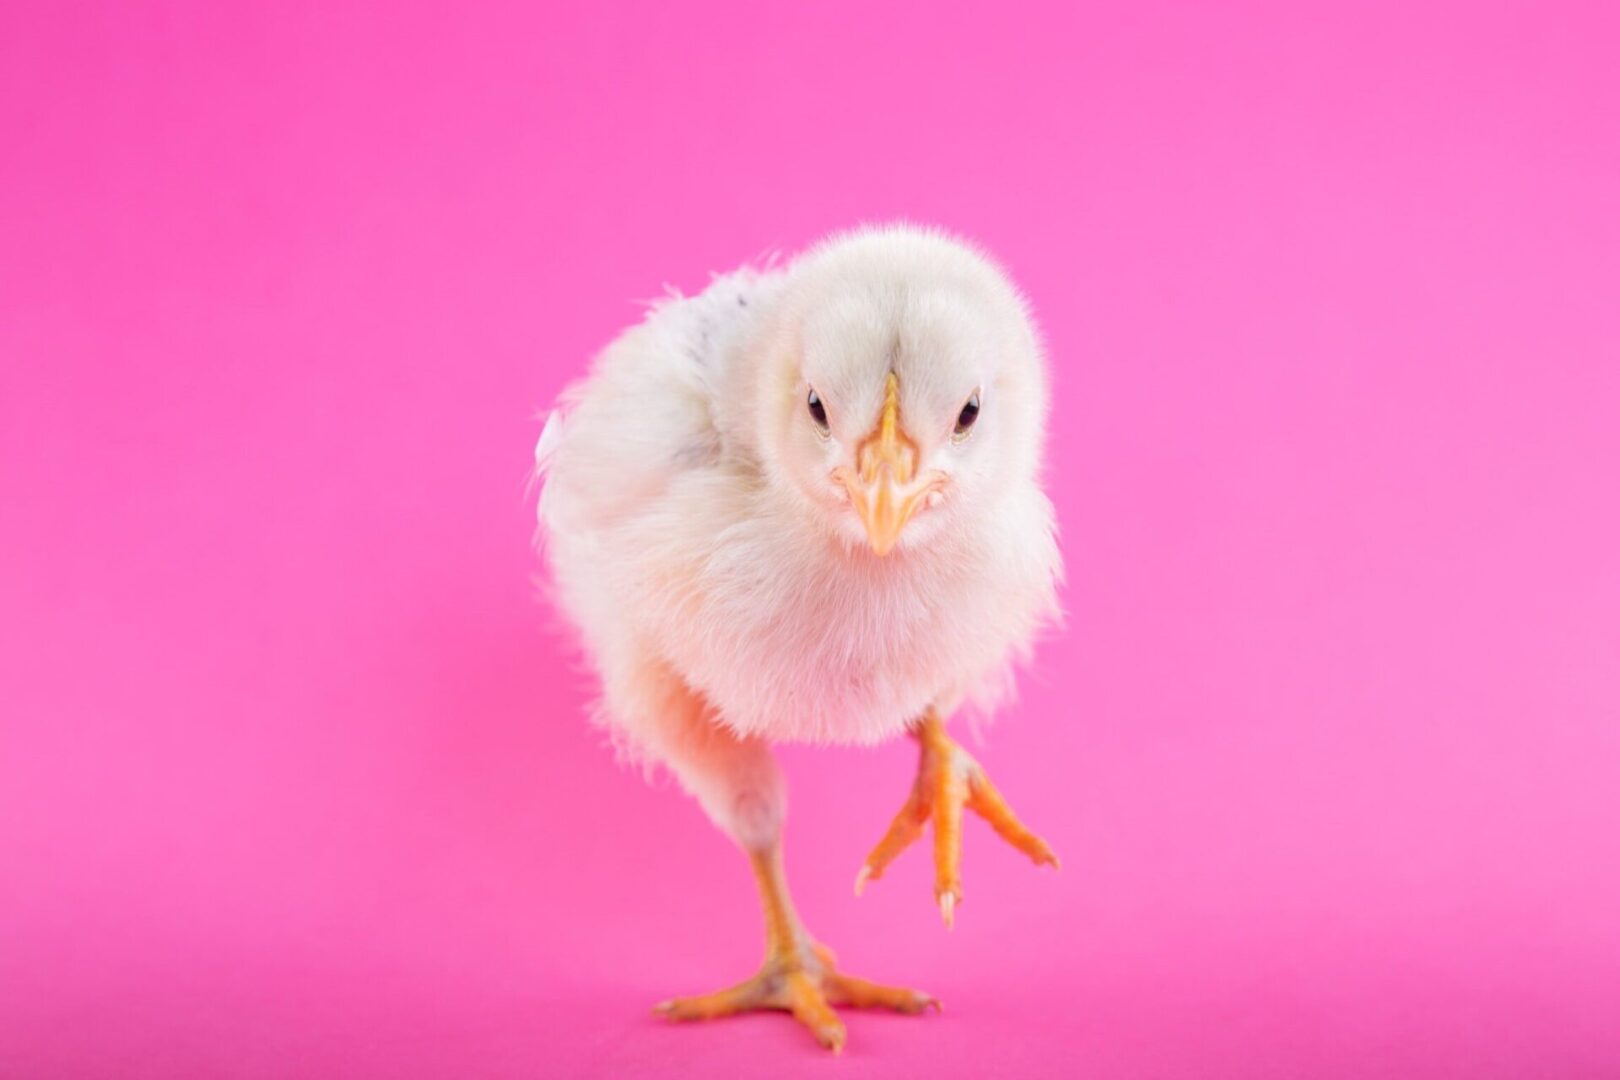 A white chicken standing on a pink background.